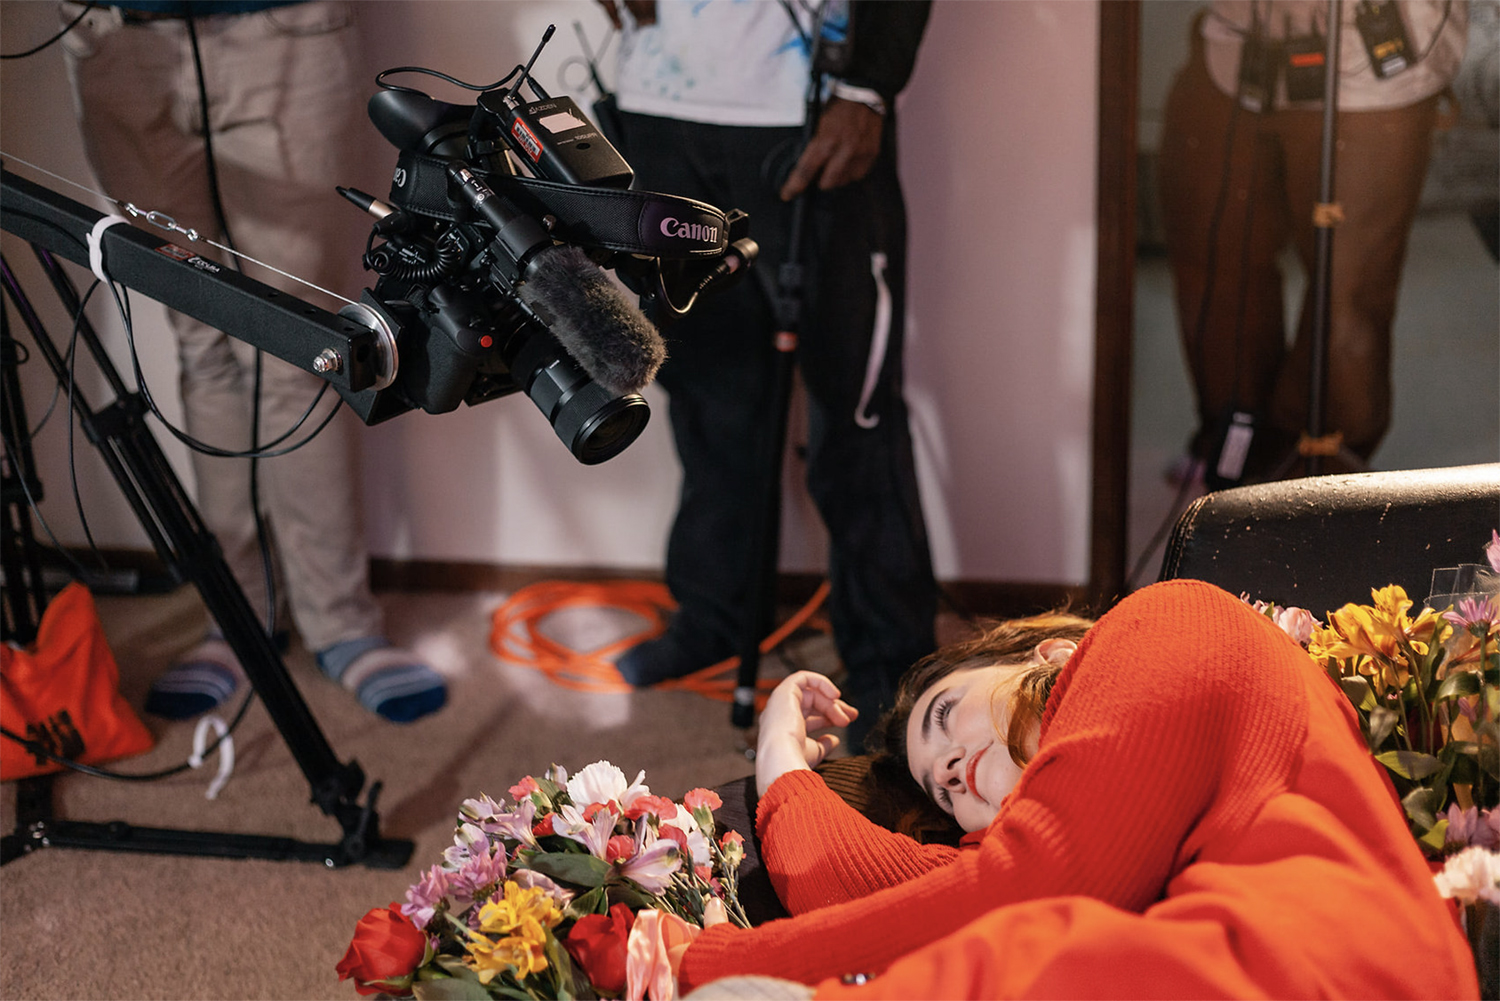 Behind the scenes photo from the shooting of Pink Violet where an actress lies surrounded by roses. Image by Maya Salganek